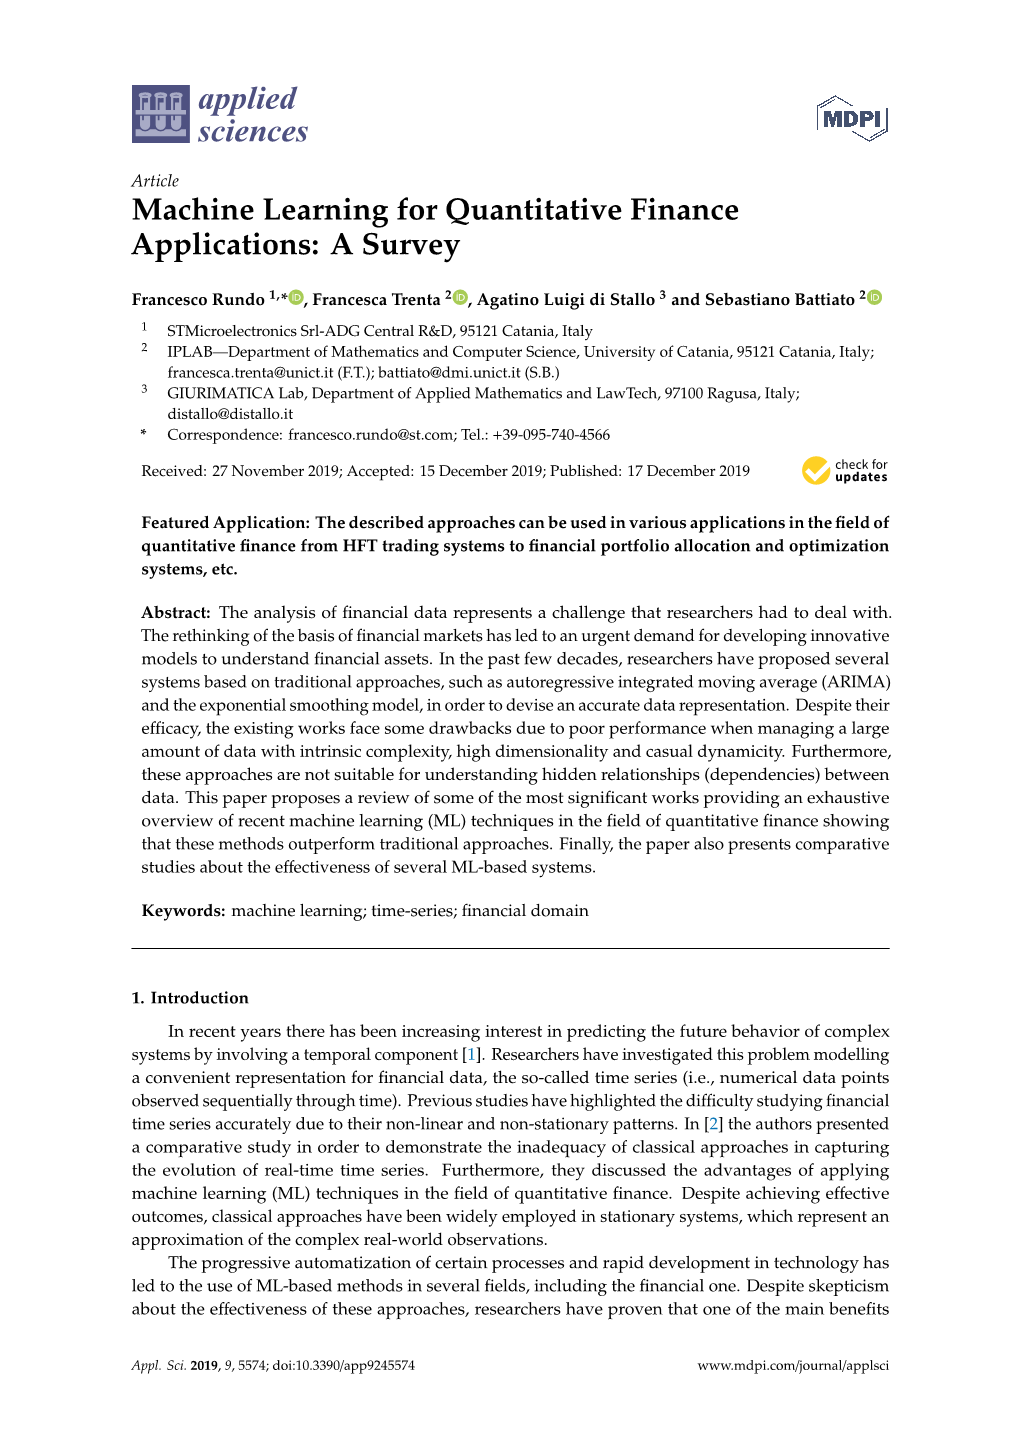 Machine Learning for Quantitative Finance Applications: a Survey